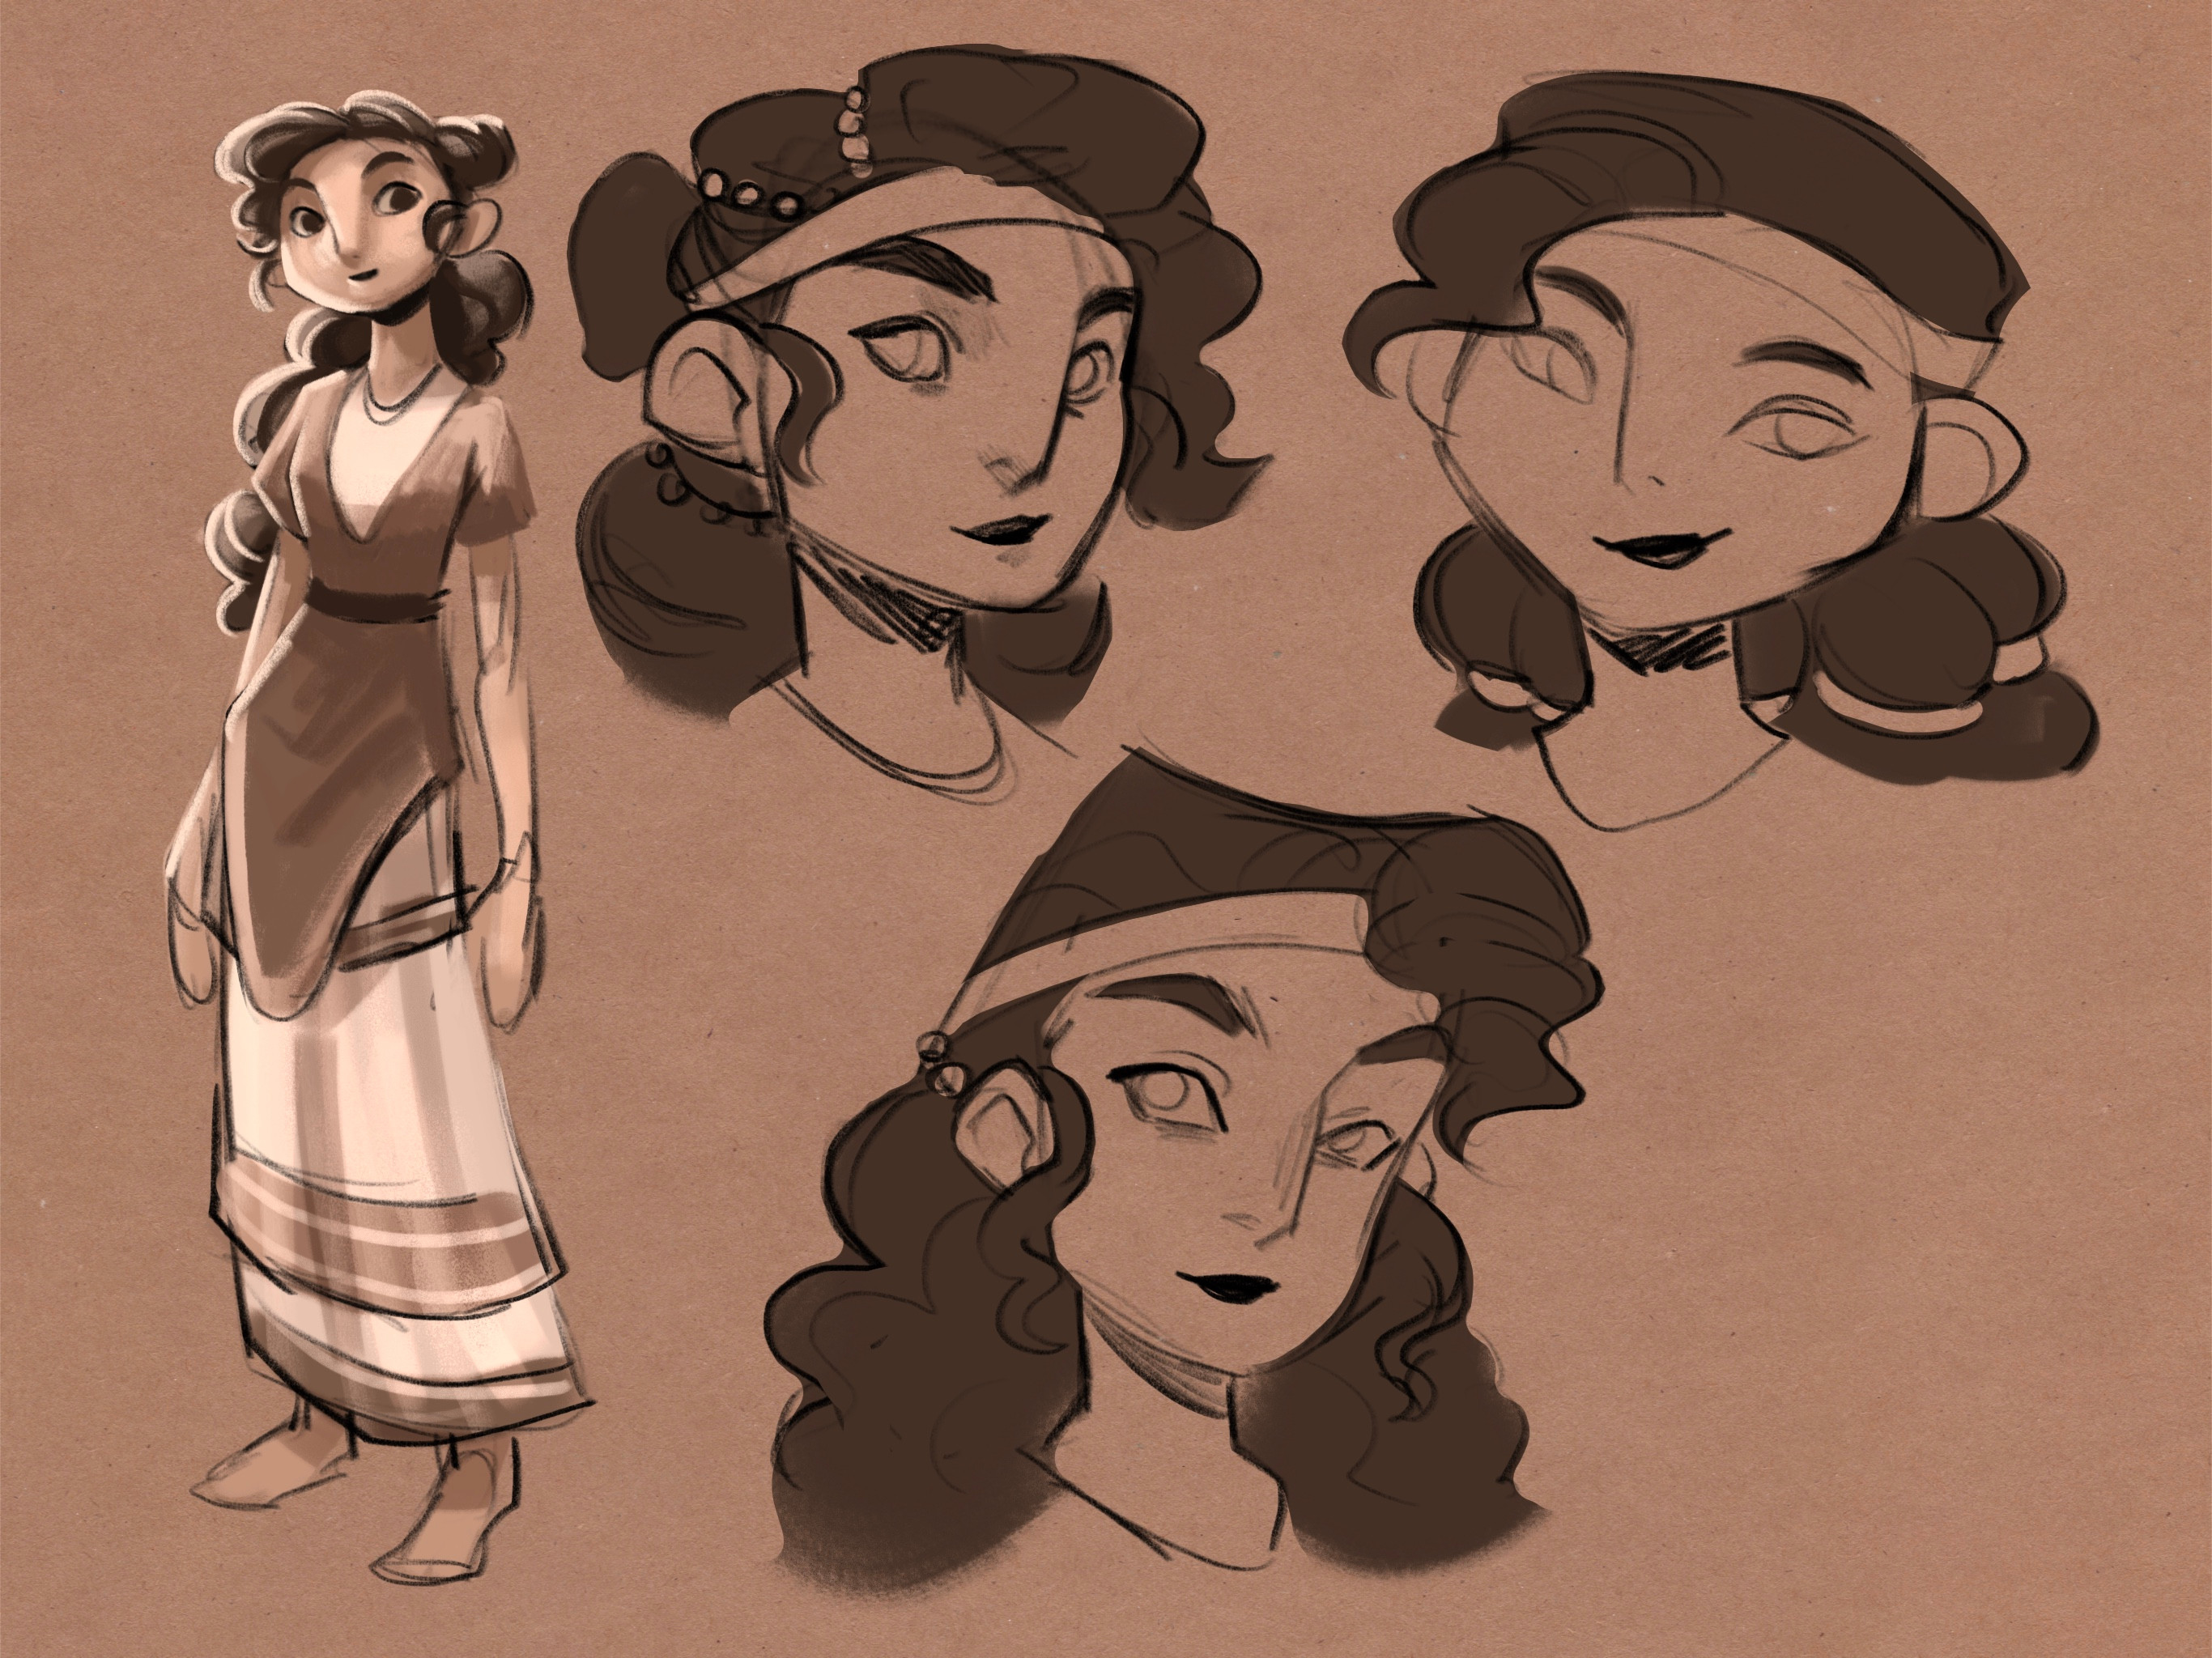 Character explorations for Ariadne, drawing pretty characters are easy for me so I usually start a project with those.